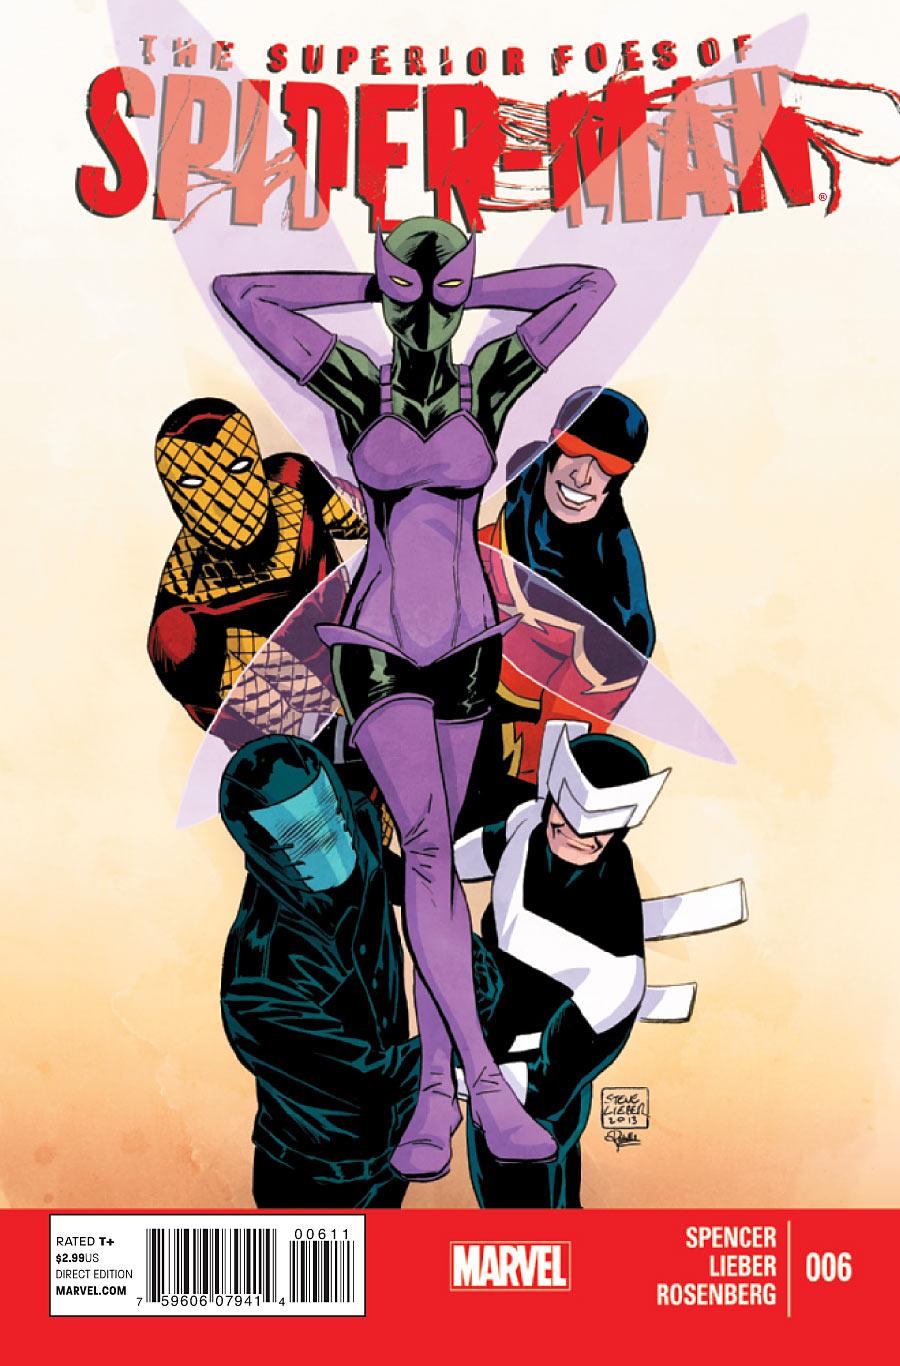 The Superior Foes of Spider-Man Vol. 1 #6